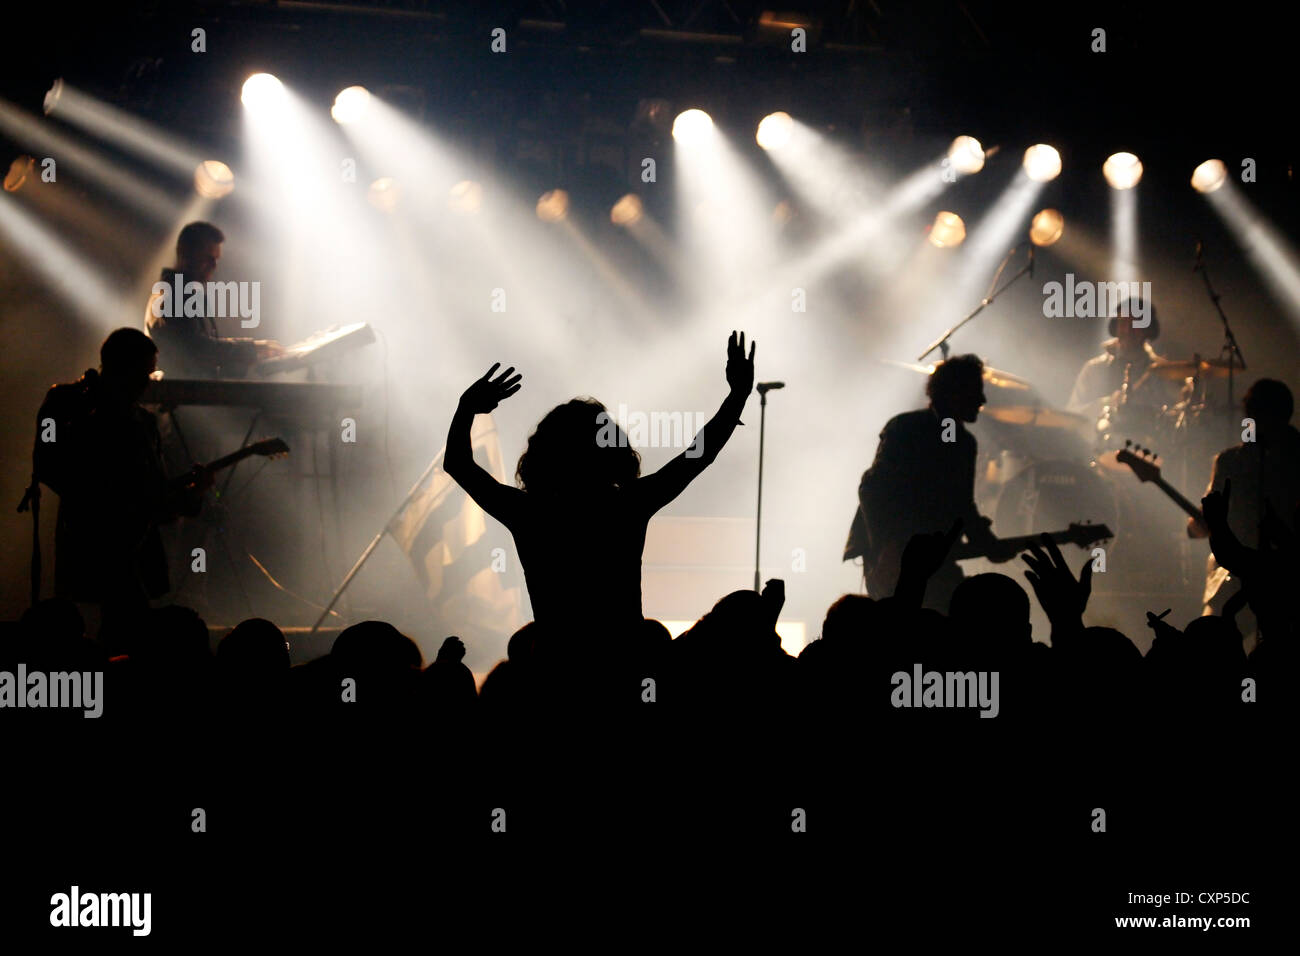 Silhouetted spectators / crowd and ambiance during live rock concert with rockers on stage illuminated by spotlights Stock Photo